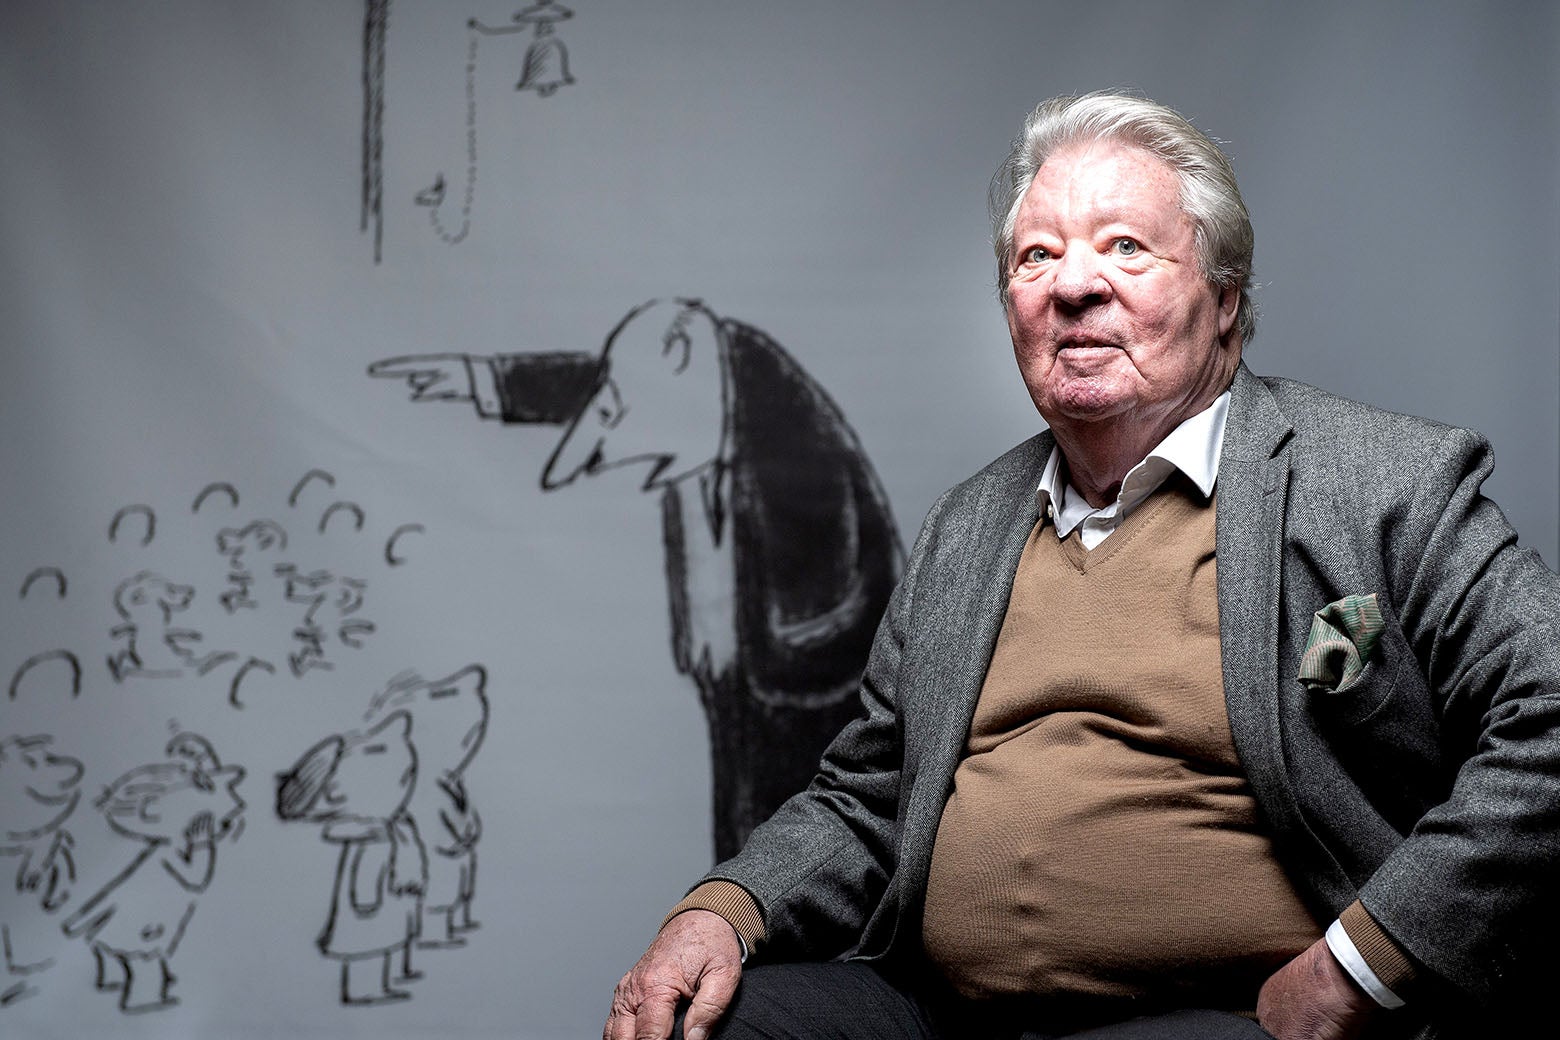 Jean-Jacques Sempe poses with cartoons of his during a photo session in Rueil-Malmaison, on Nov. 6, 2019.
